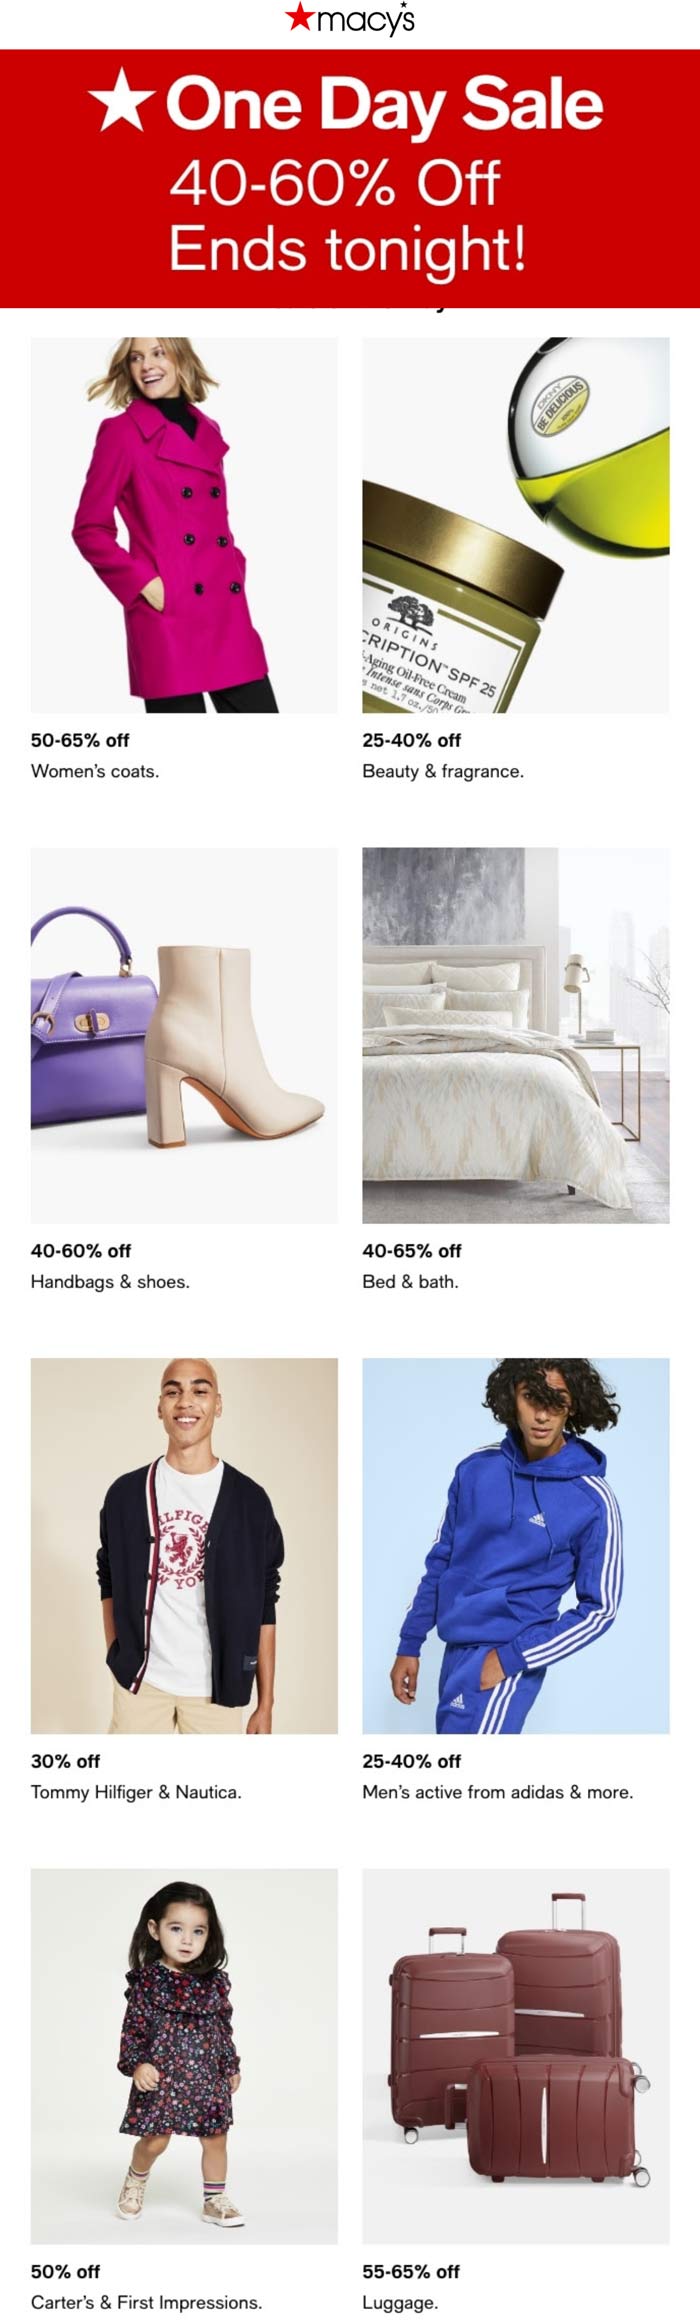 One day sale 40-60% off activewear, shoes, bed, handbags & more today at Macys #macys